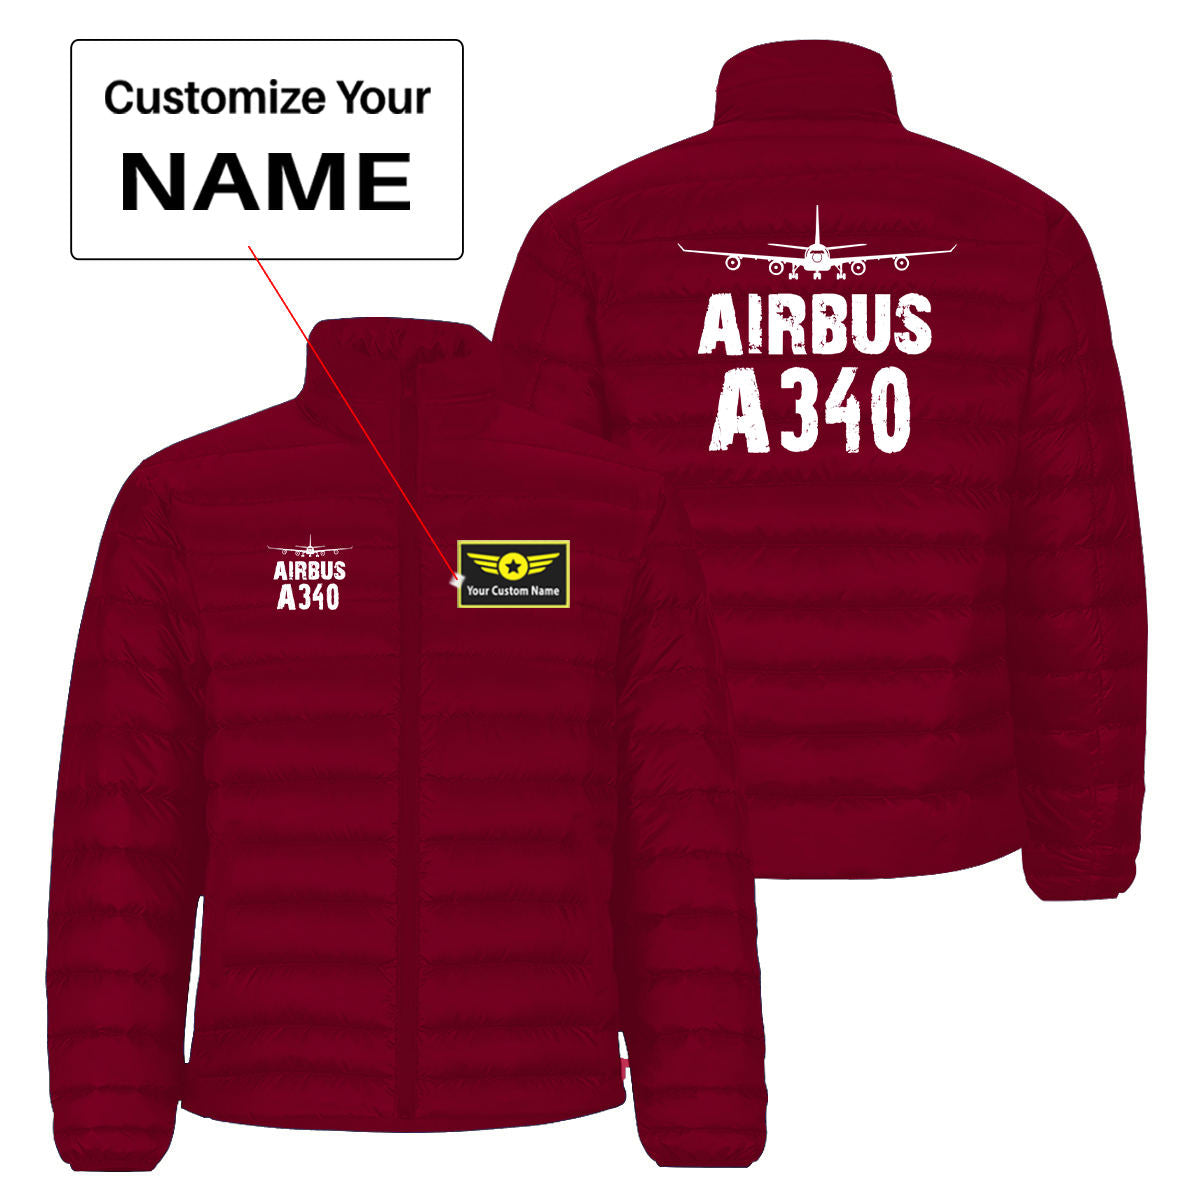 Airbus A340 & Plane Designed Padded Jackets